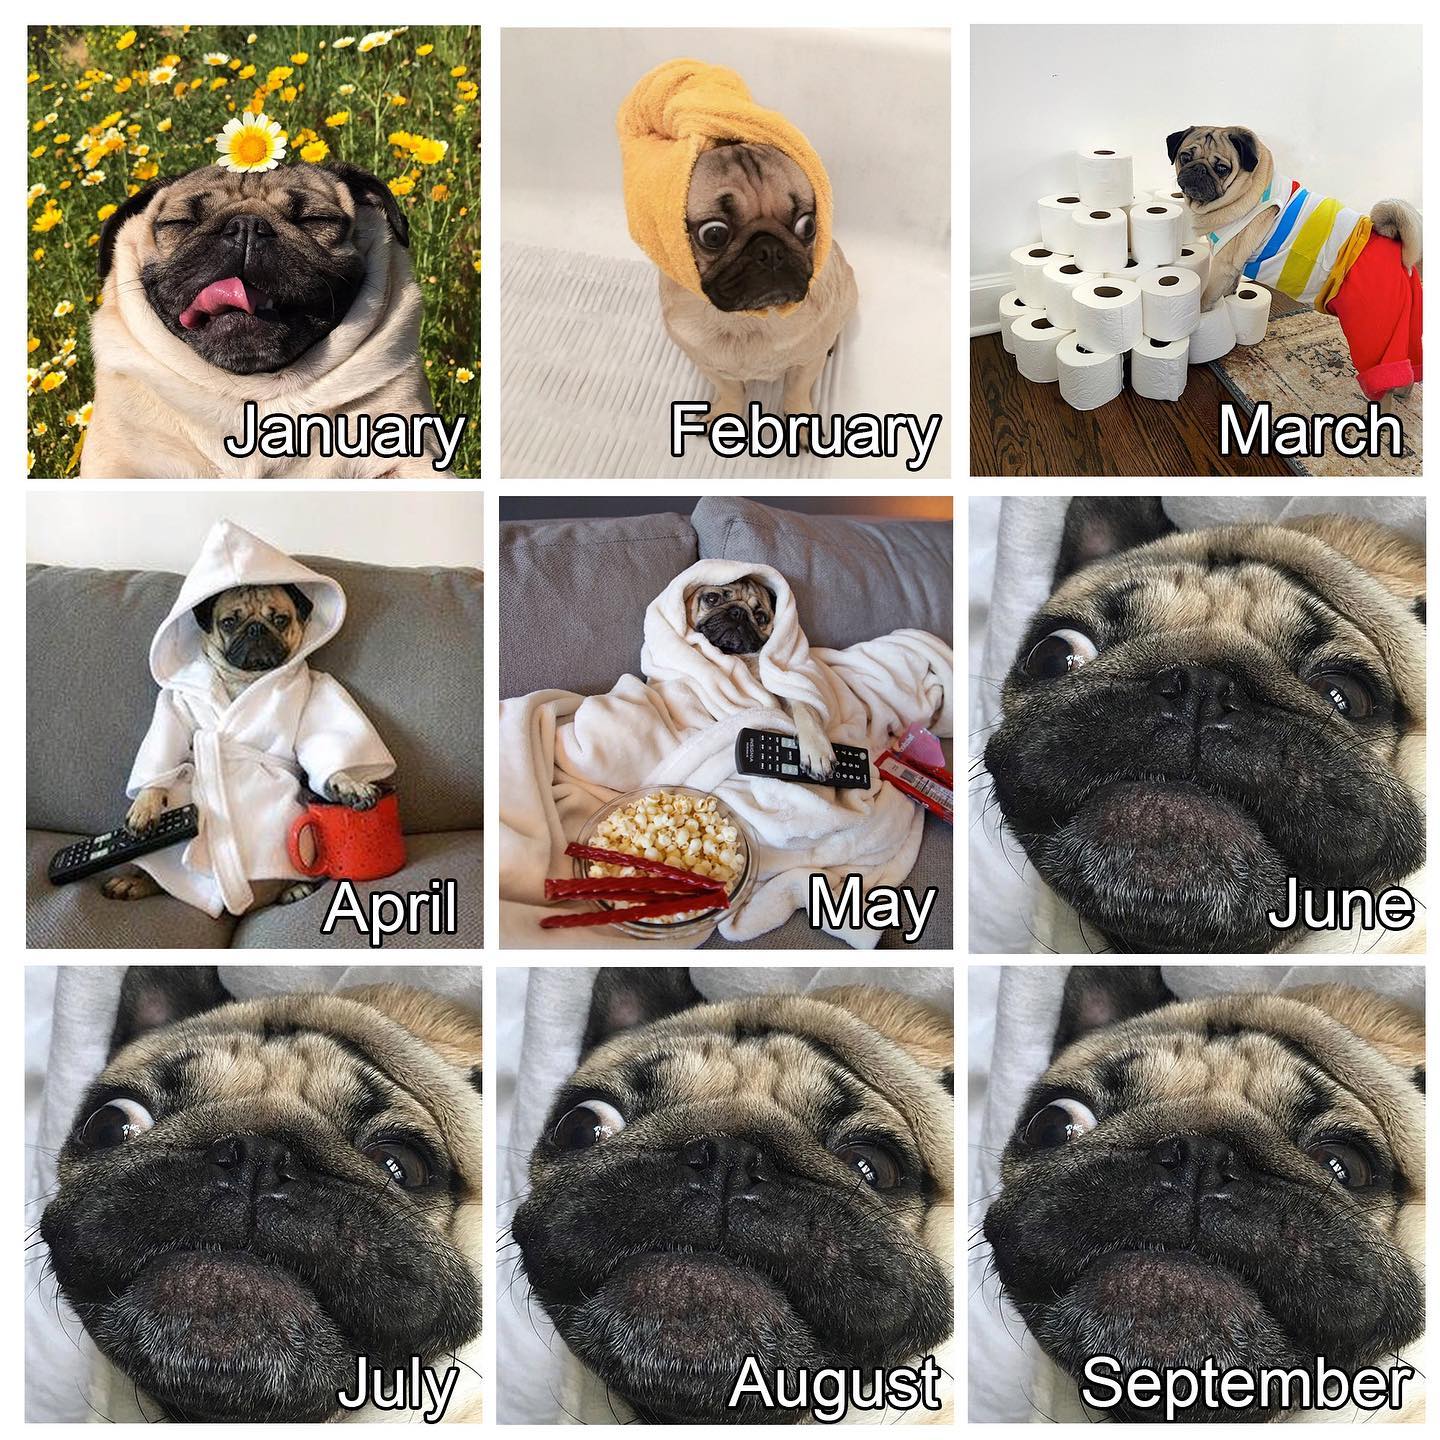 2020 challenge - reese witherspoon -pug - January February March April May June July August September